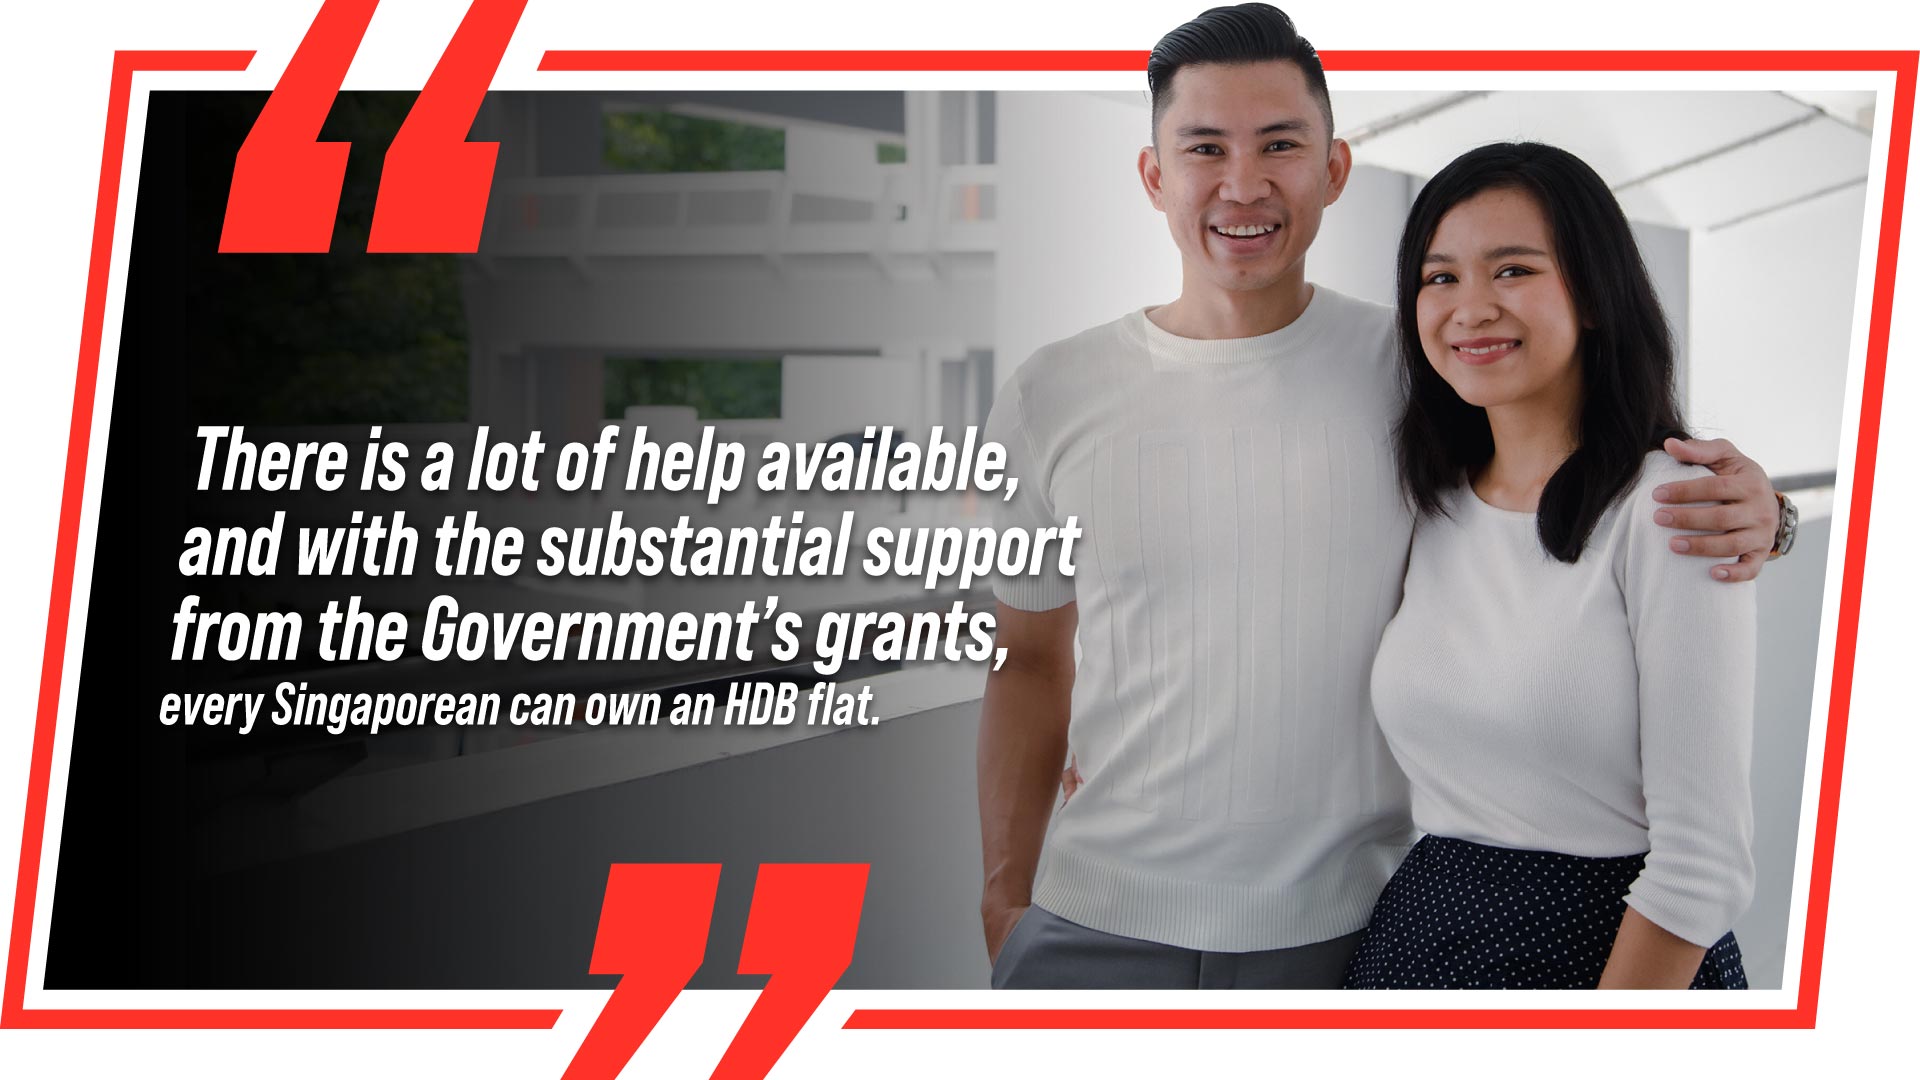 Substantial support from the Government’s grants